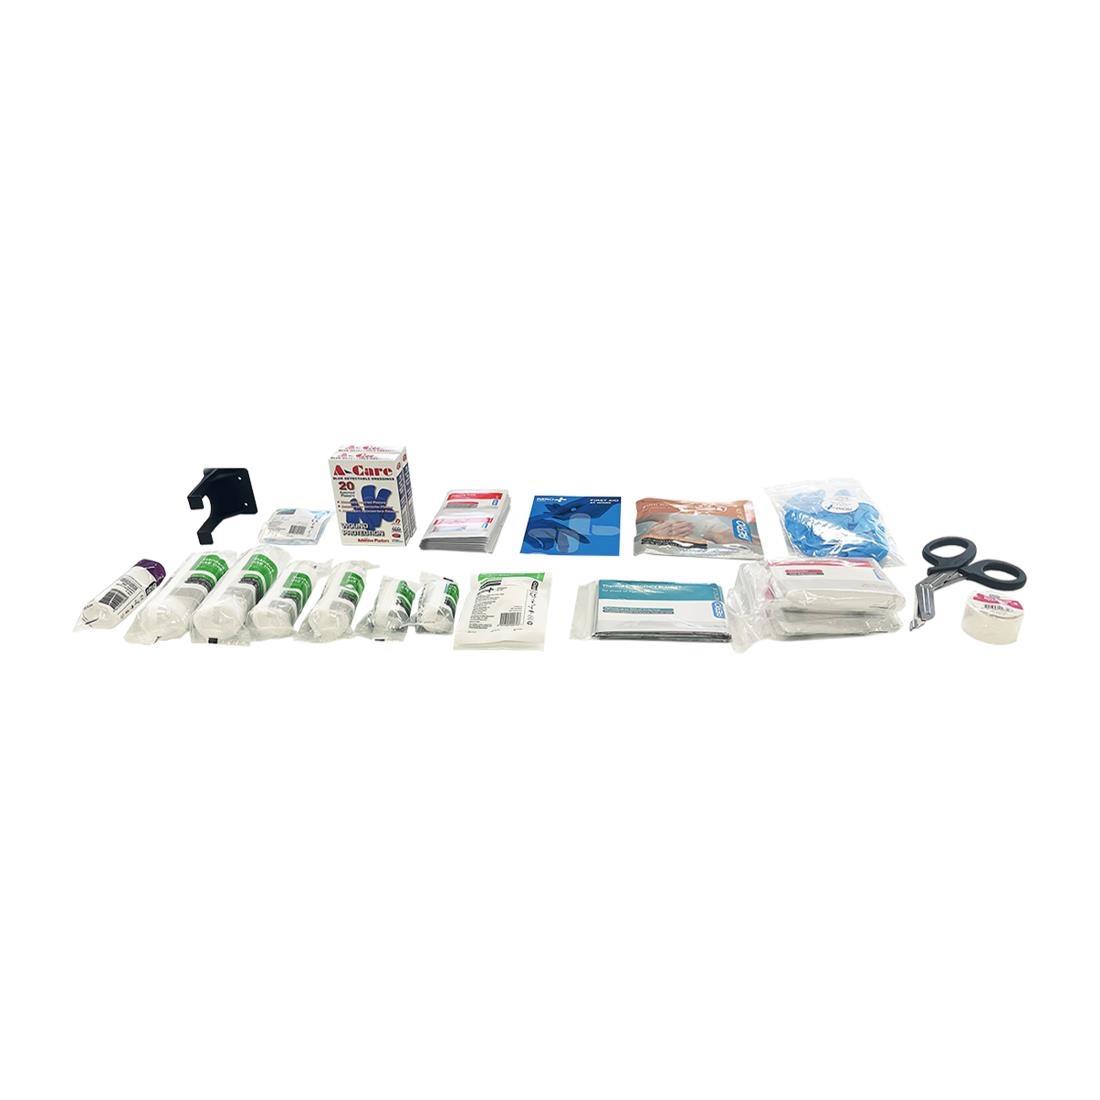 Aero Aerokit BS 8599 Small Catering First Aid Kit Refill - FT591  - 1